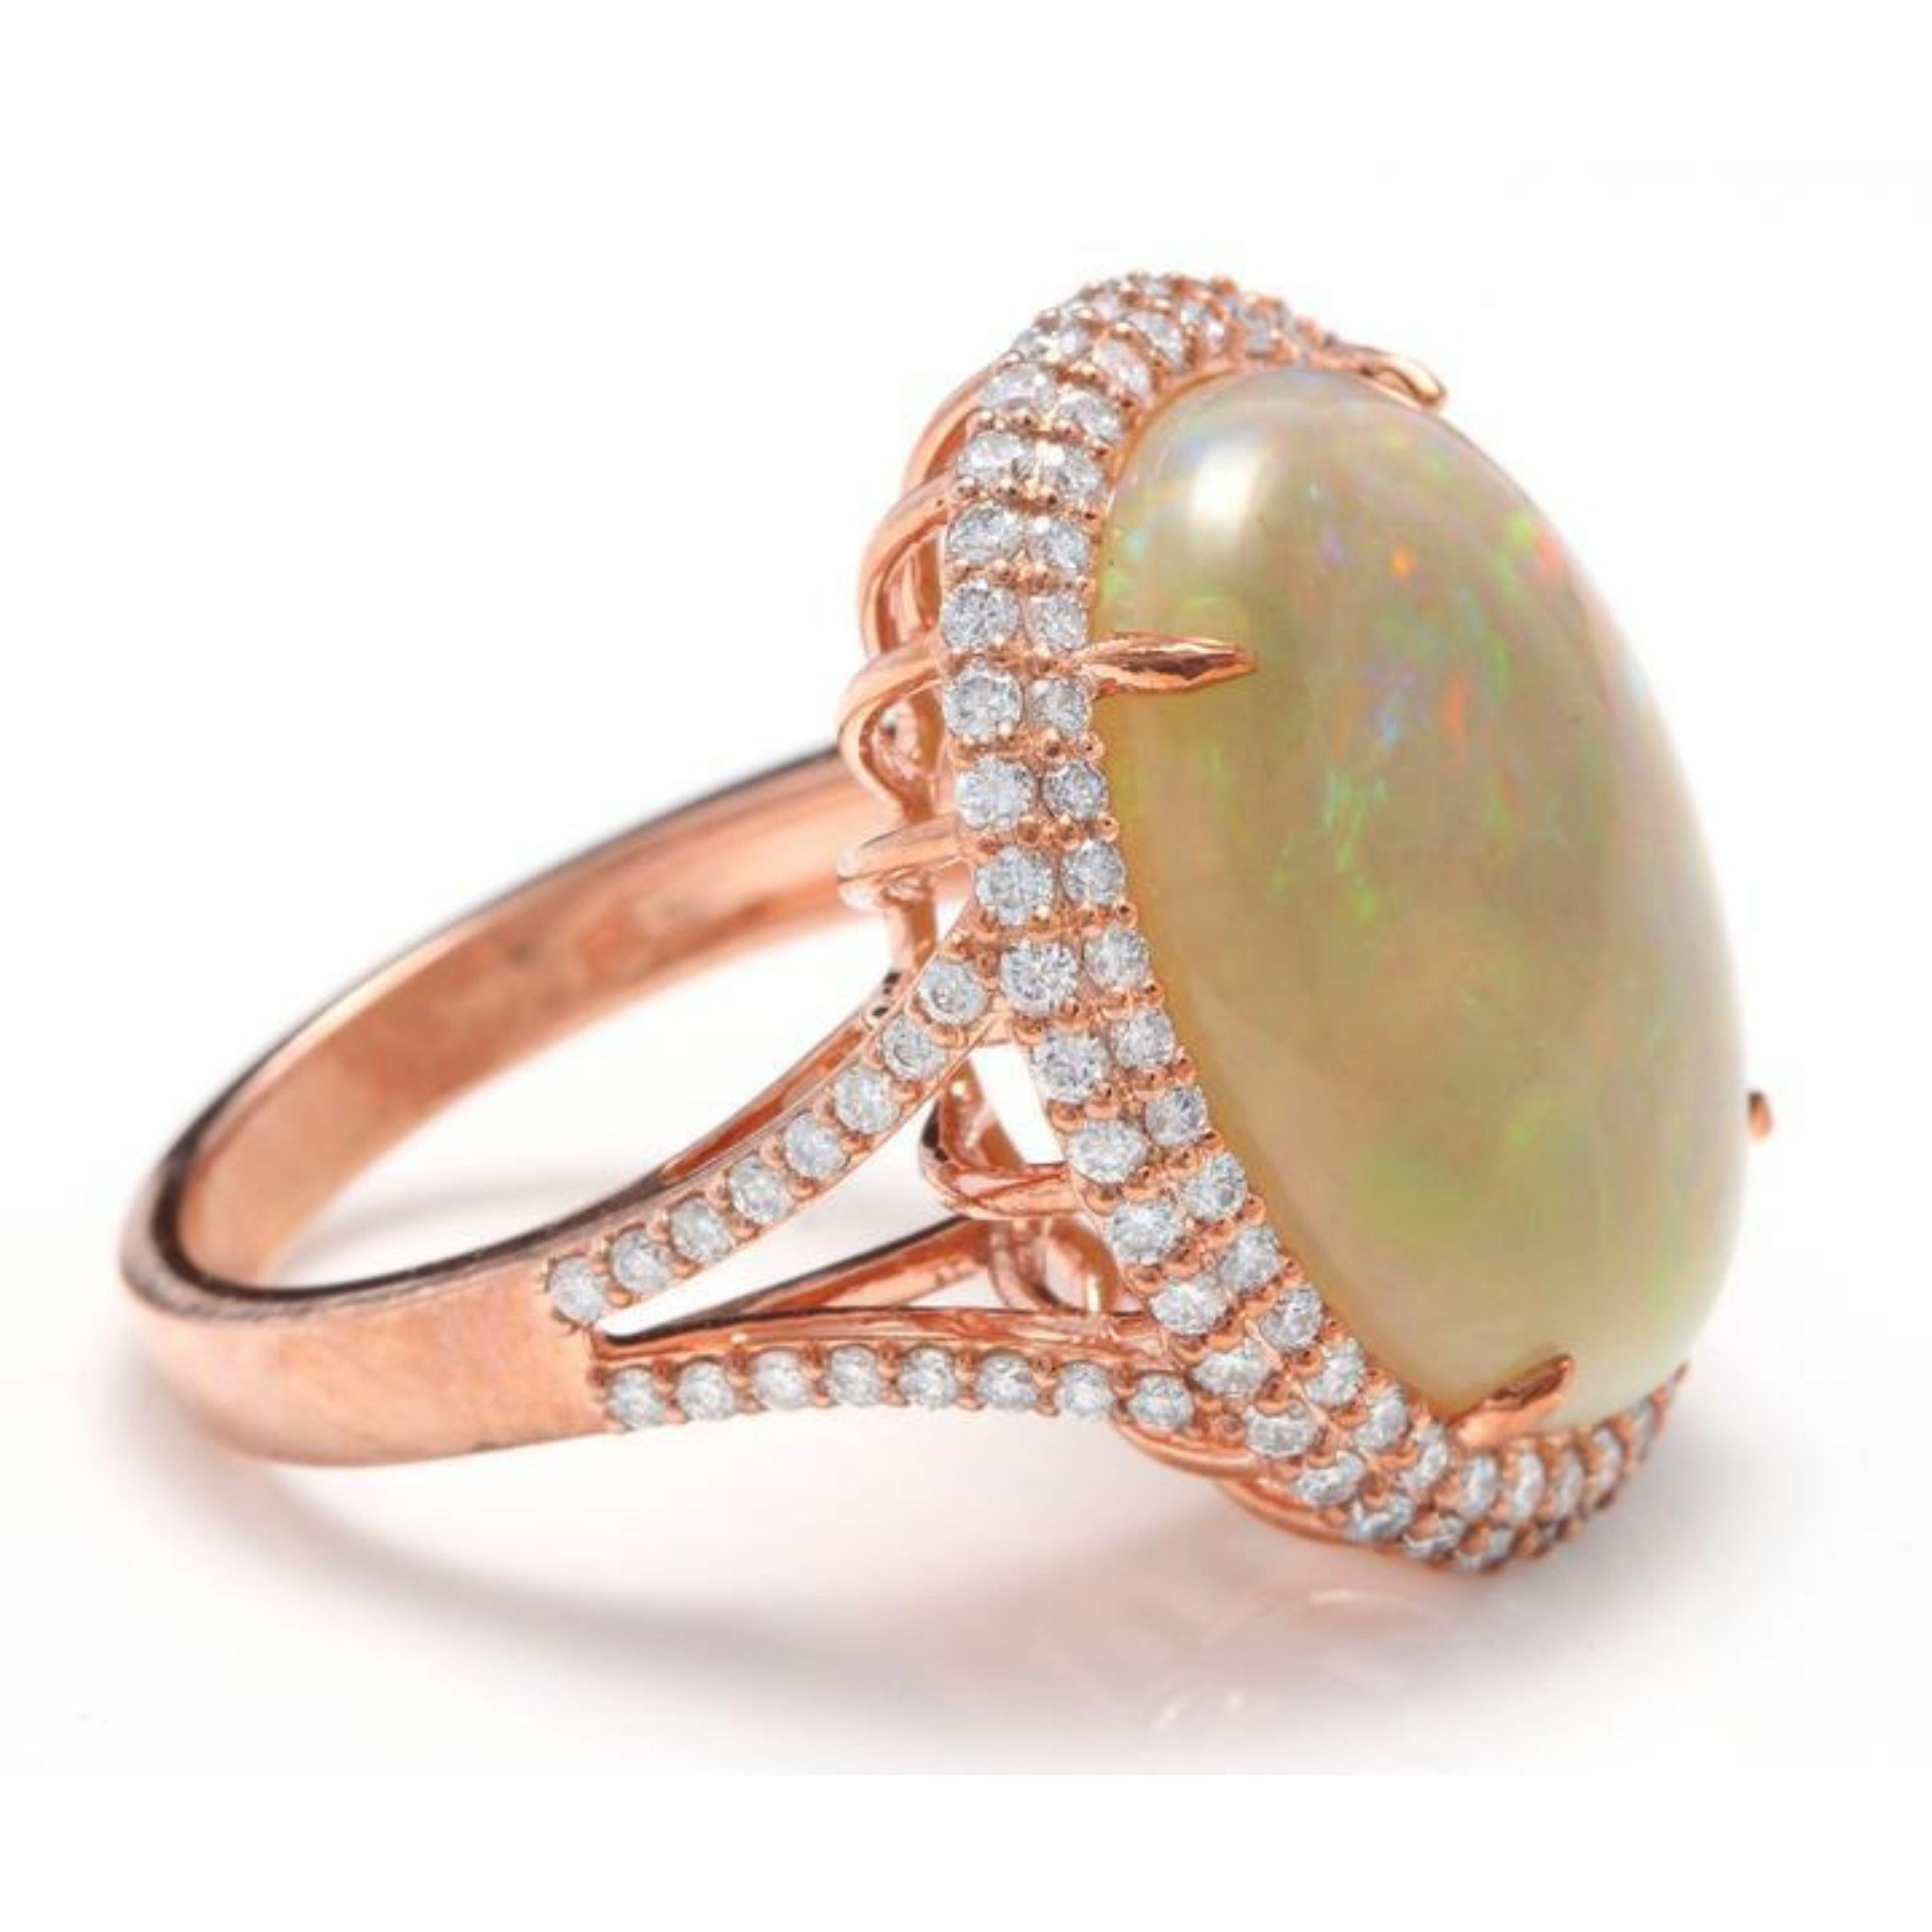 Mixed Cut 8.60 Ct Natural Impressive Australian Opal and Diamond 14K Solid Rose Gold Ring For Sale